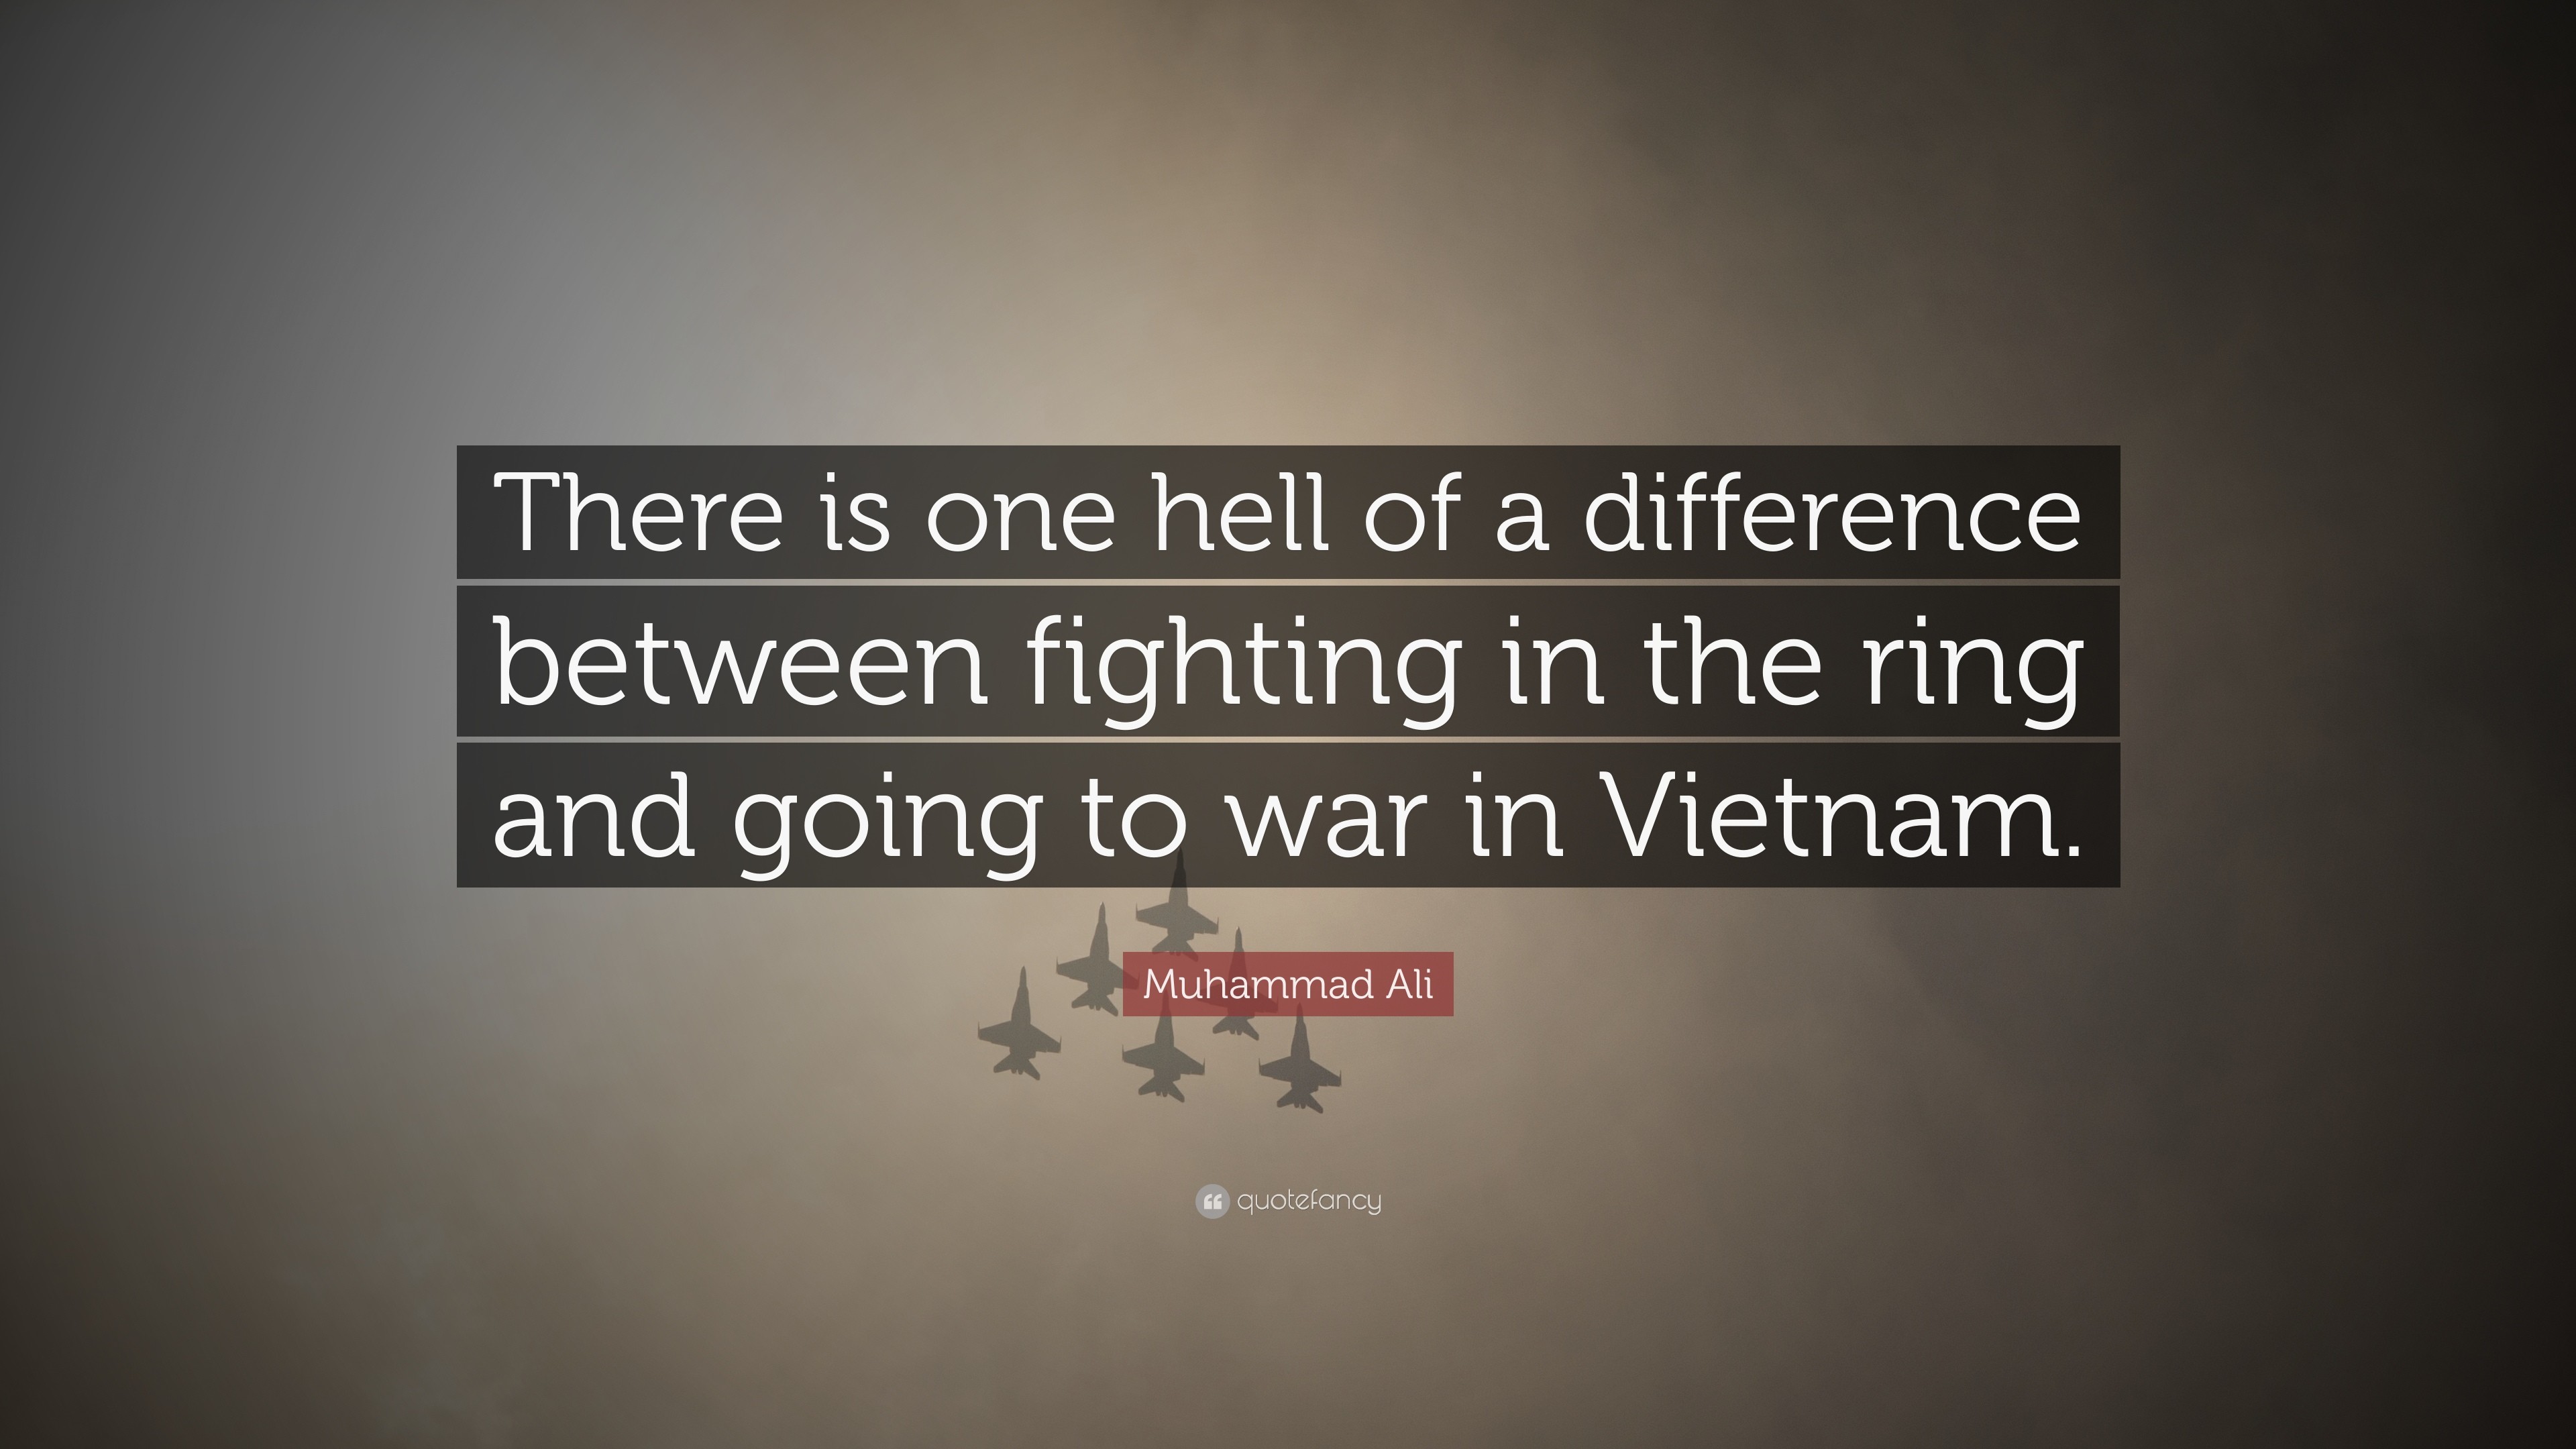 3840x2160 Muhammad Ali Quote: “There is one hell of a difference between fighting in  the